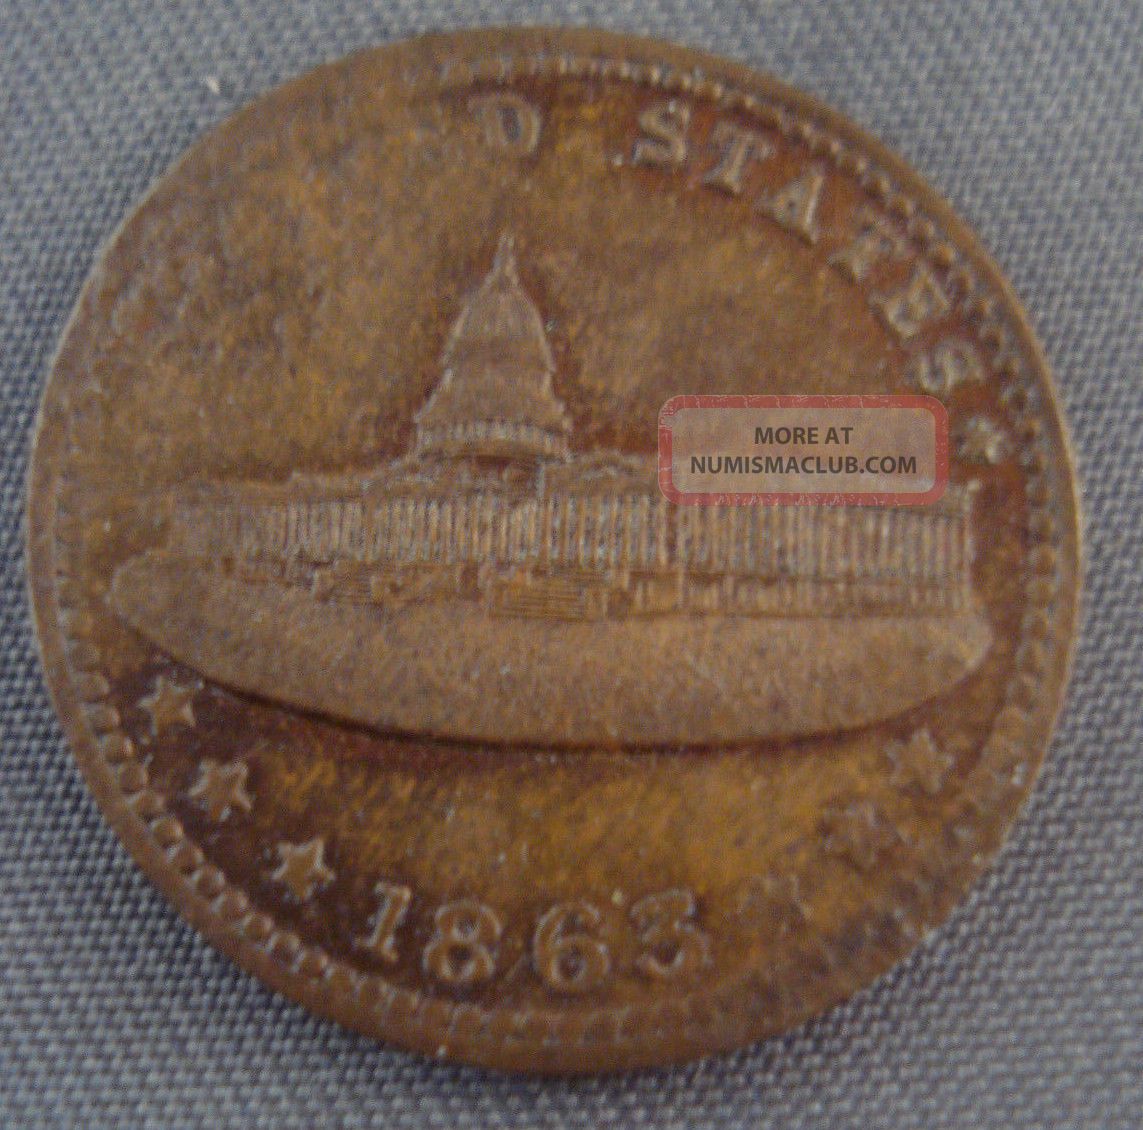 civil war token army navy union shall be preserved